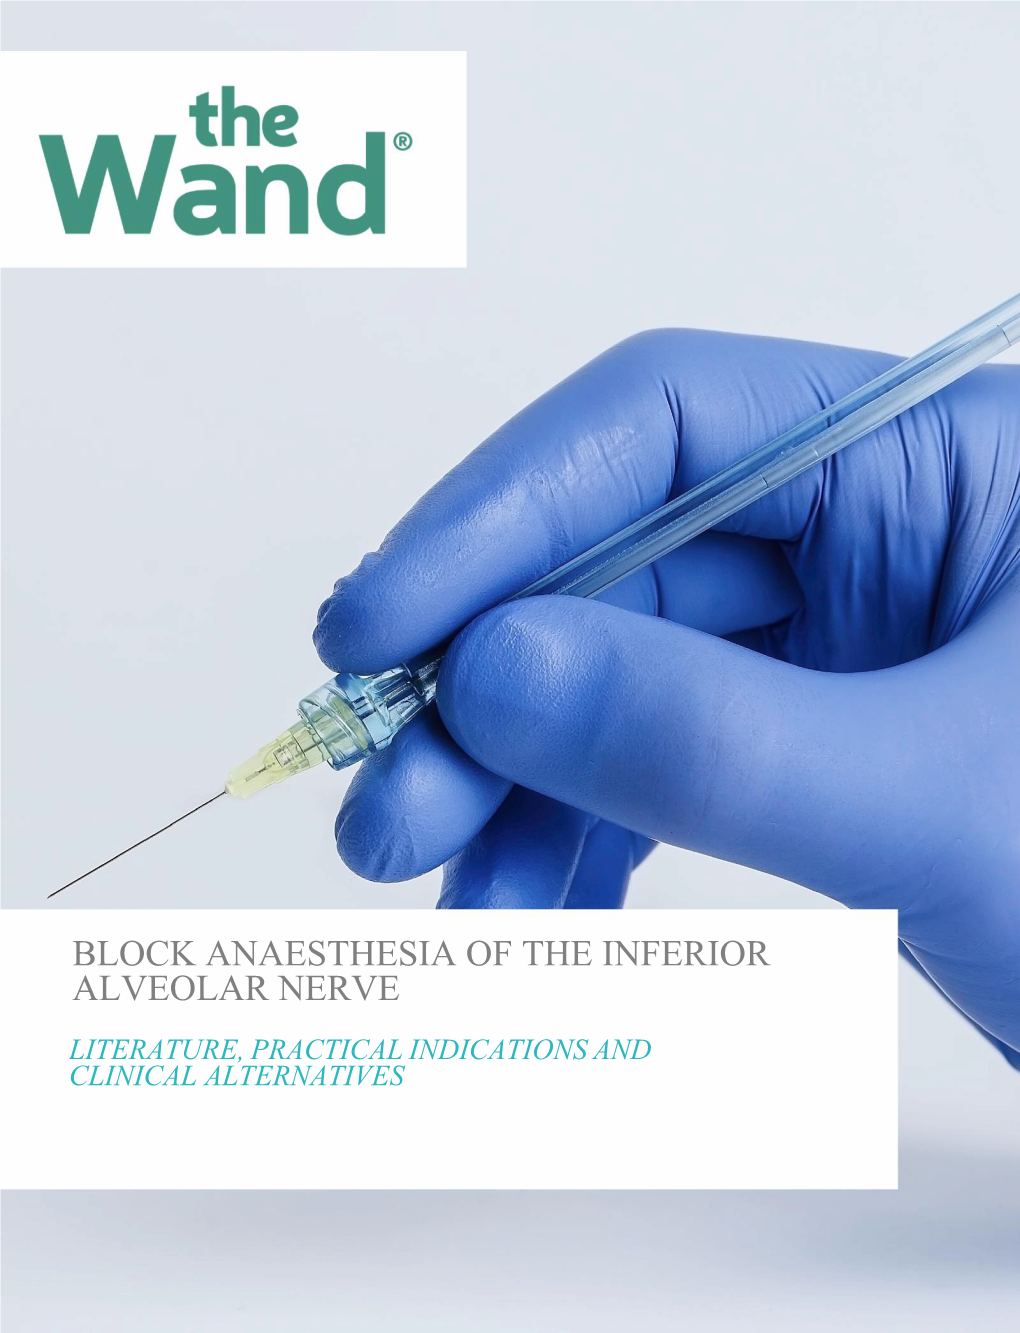 Block Anaesthesia of the Inferior Alveolar Nerve Literature, Practical Indications and Clinical Alternatives